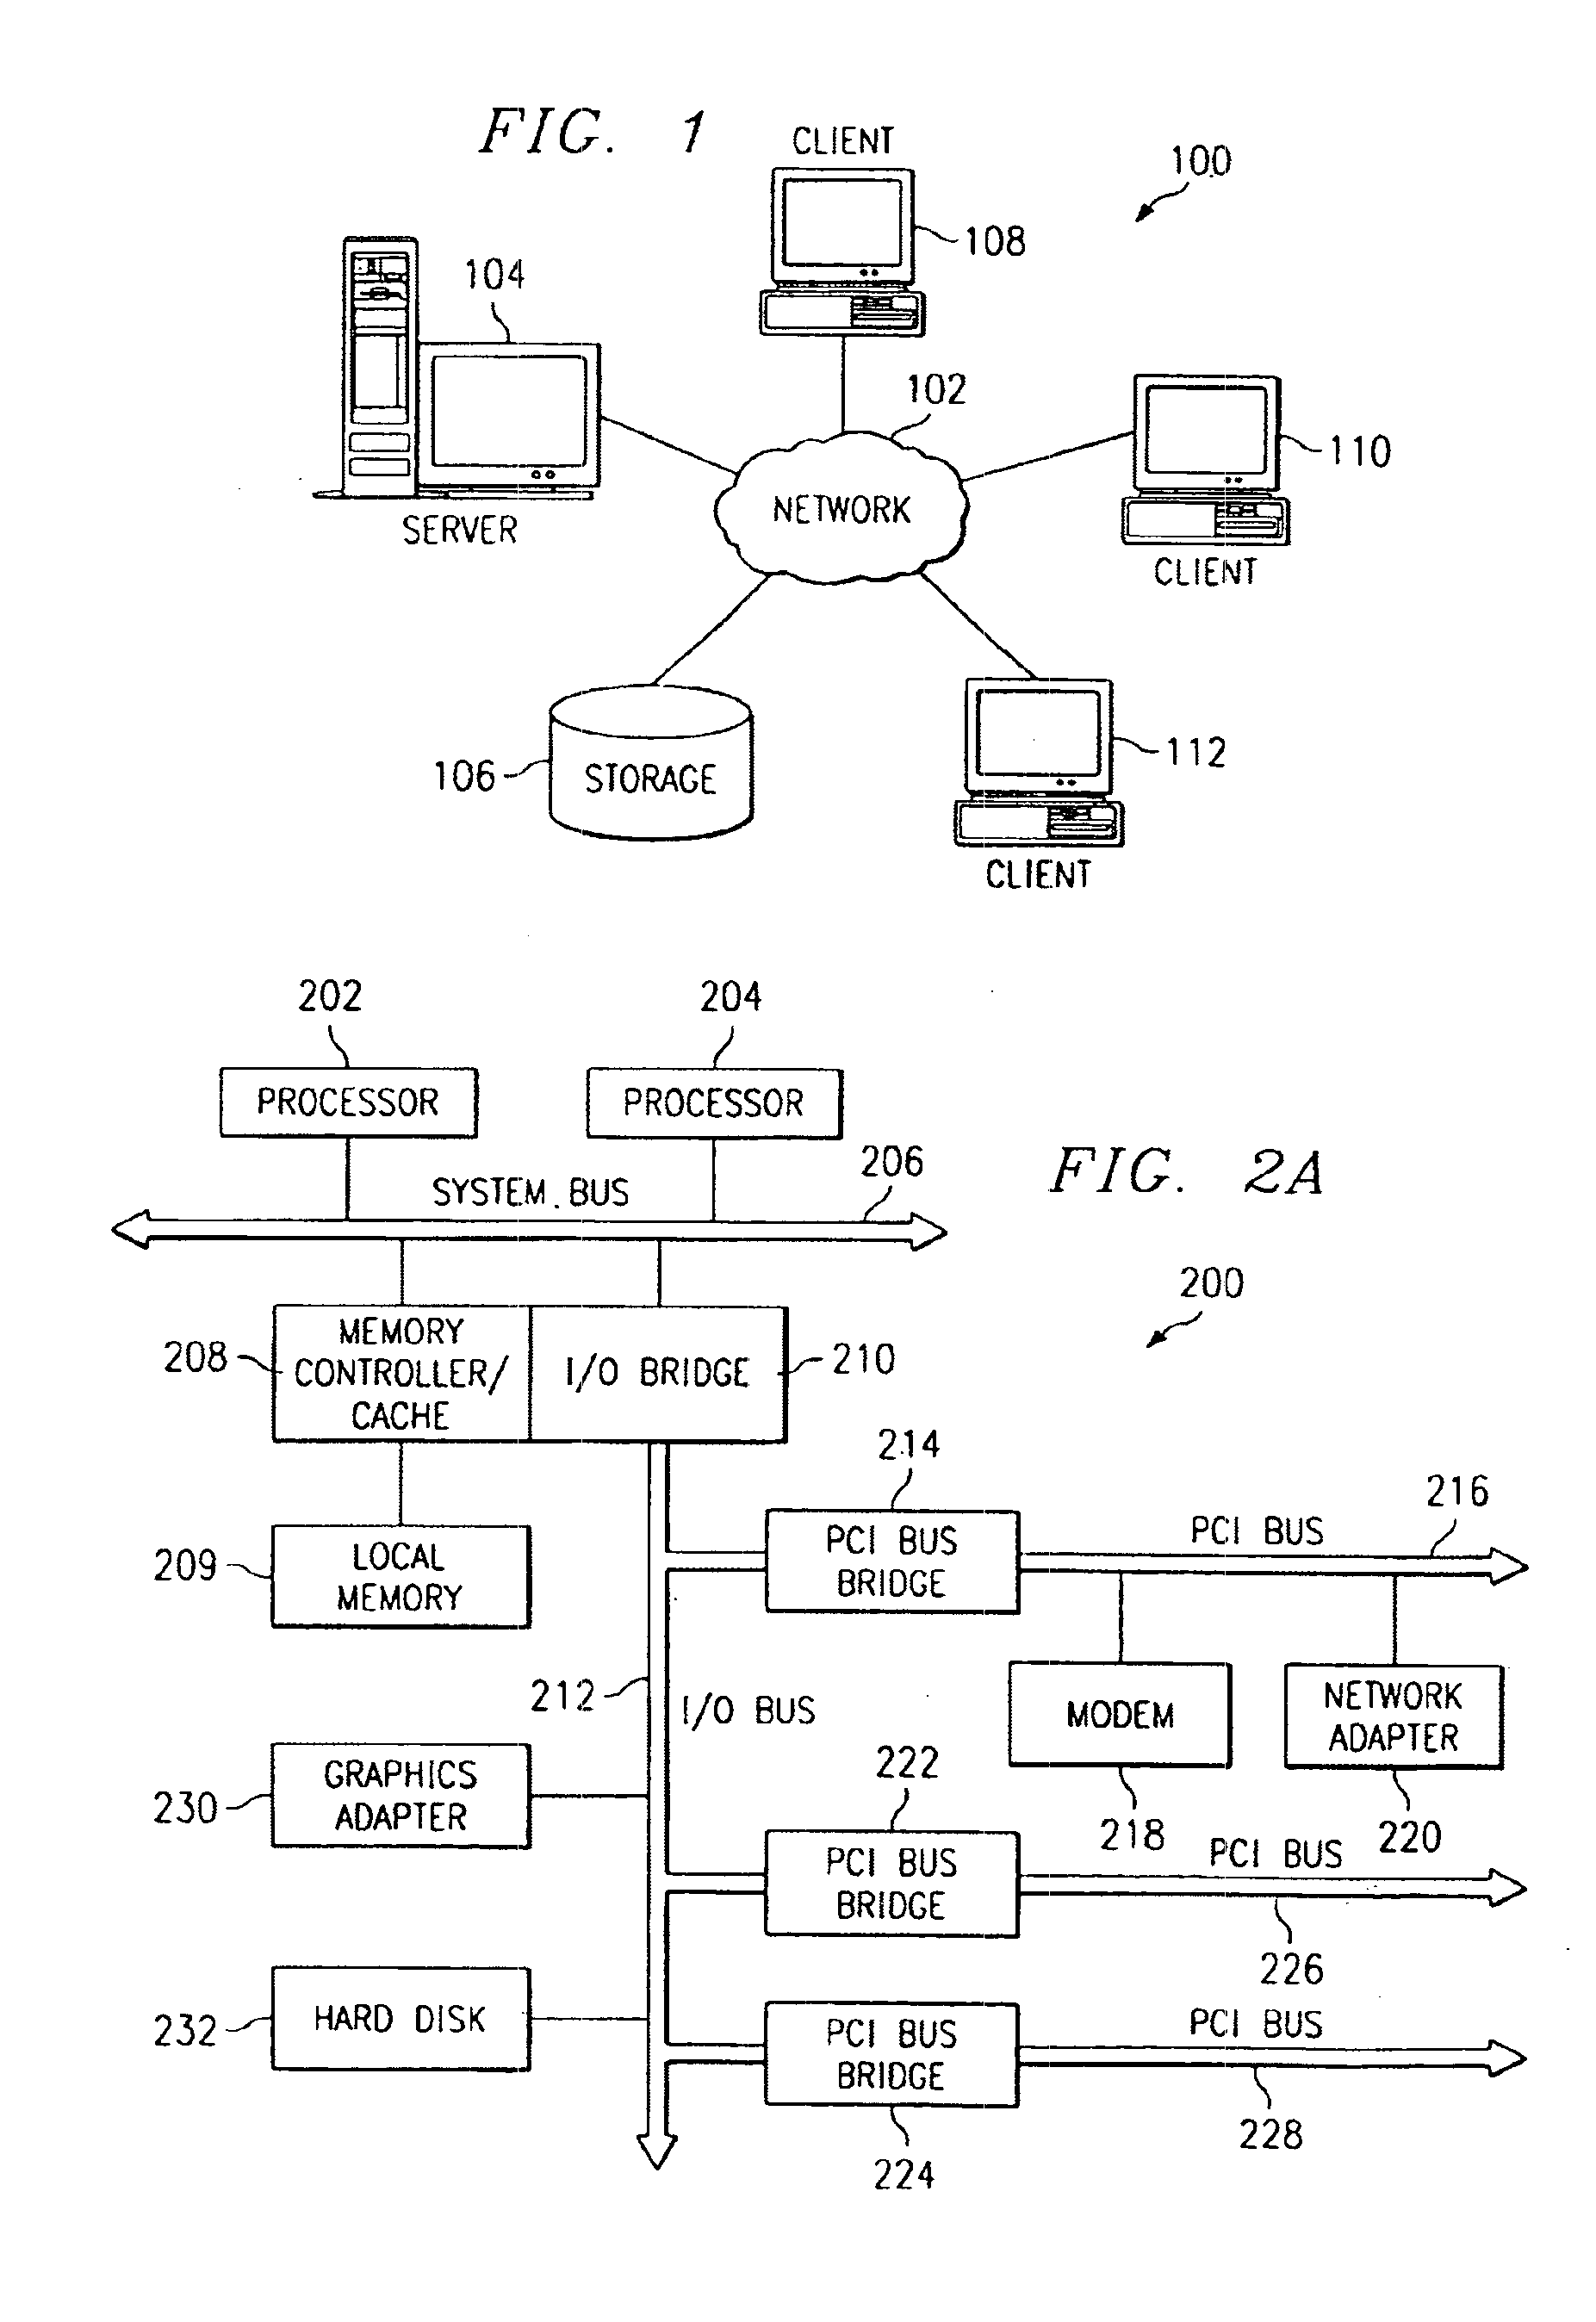 Method and system for apportioning changes in metric variables in an symmetric multiprocessor (SMP) environment